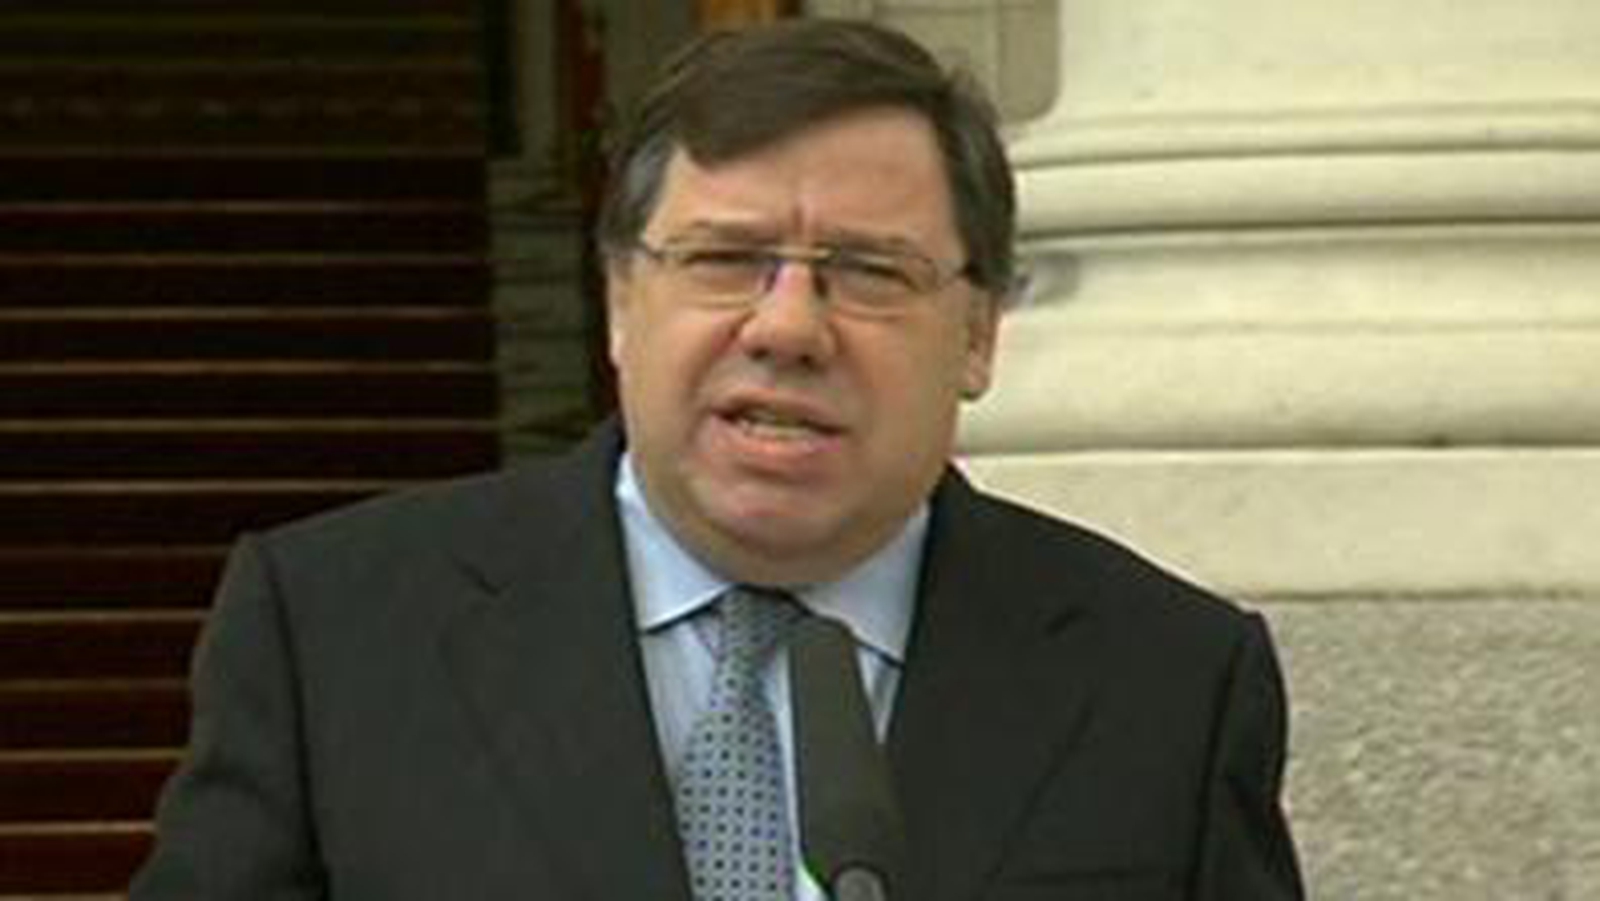 Interview Damaged Cowen S Credibility Poll